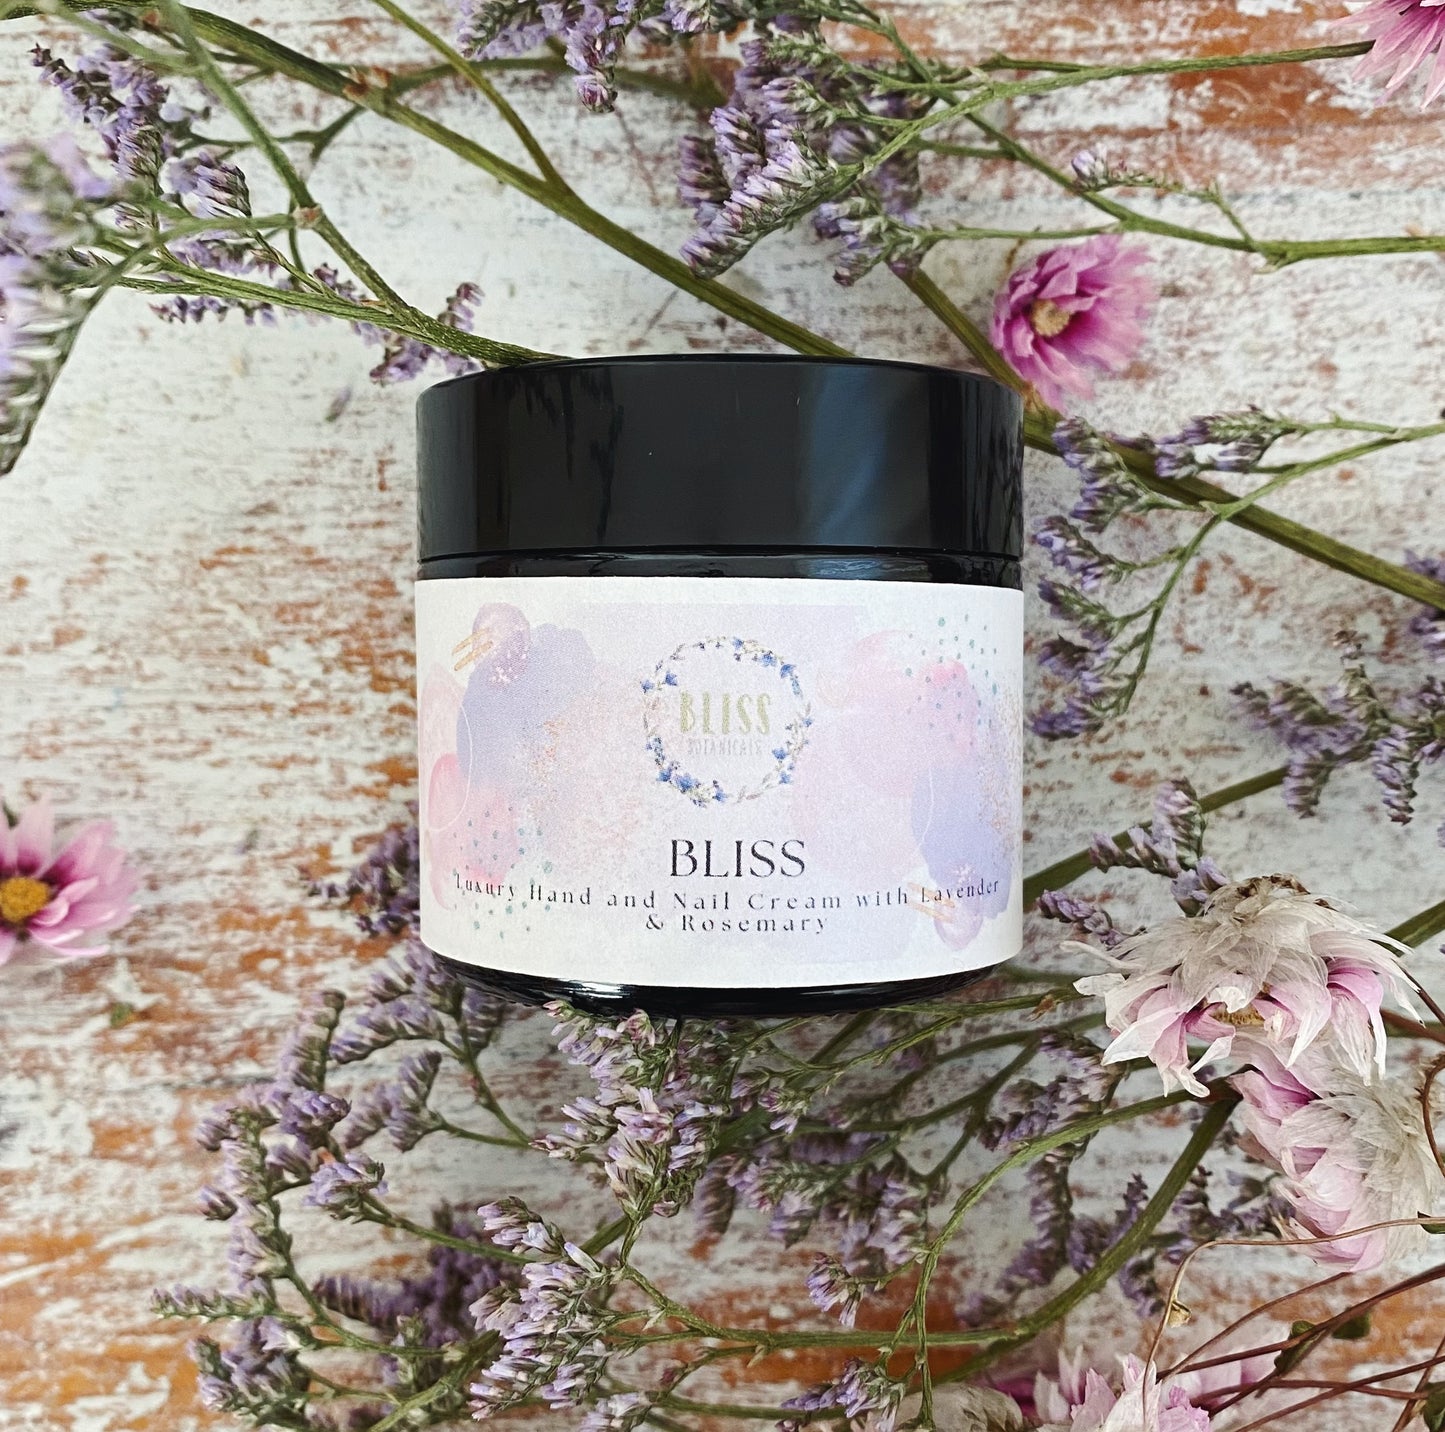 Bliss Cream - Luxury Hand and Nail Cream with Lavender and Rosemary